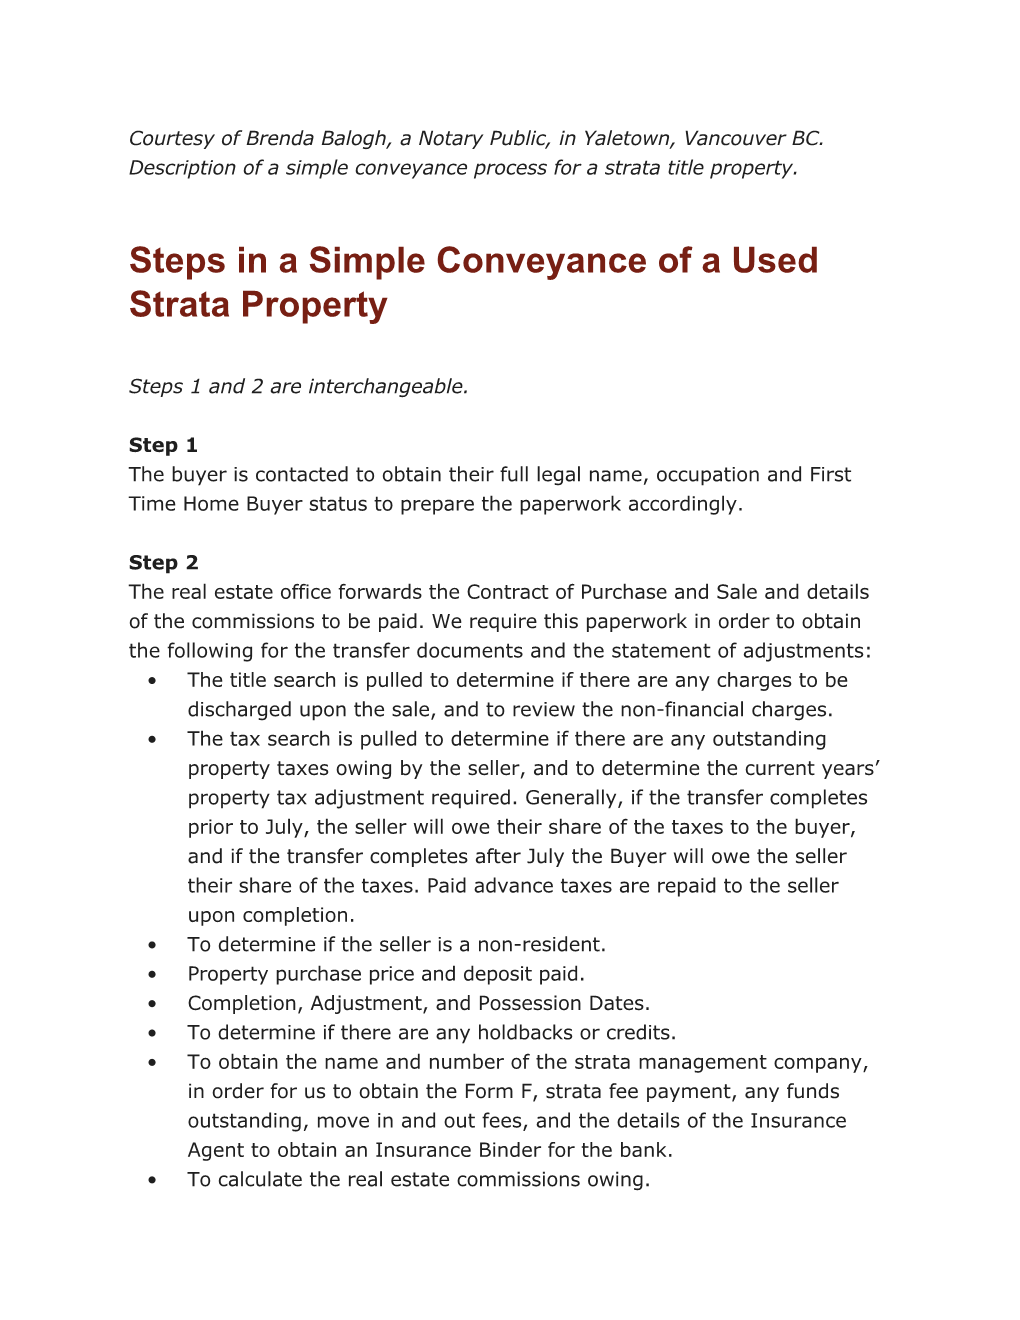 Steps in a Simple Conveyance of a Used Strata Property